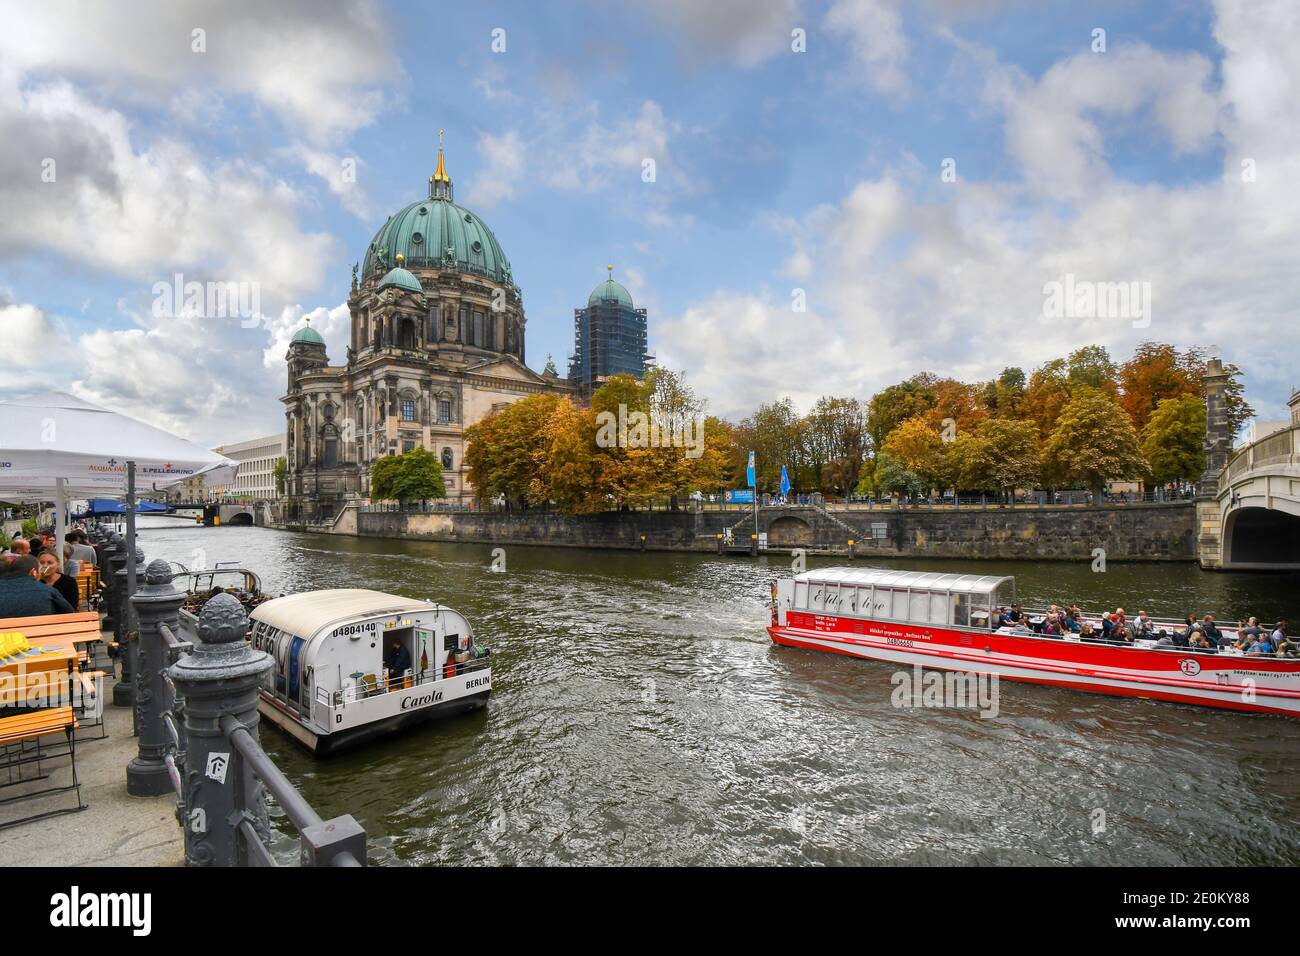 Tourists enjoy an autumn afternoon at a waterfront cafe and cruising along the Spree River with the Berlin Cathedral in view. Stock Photo